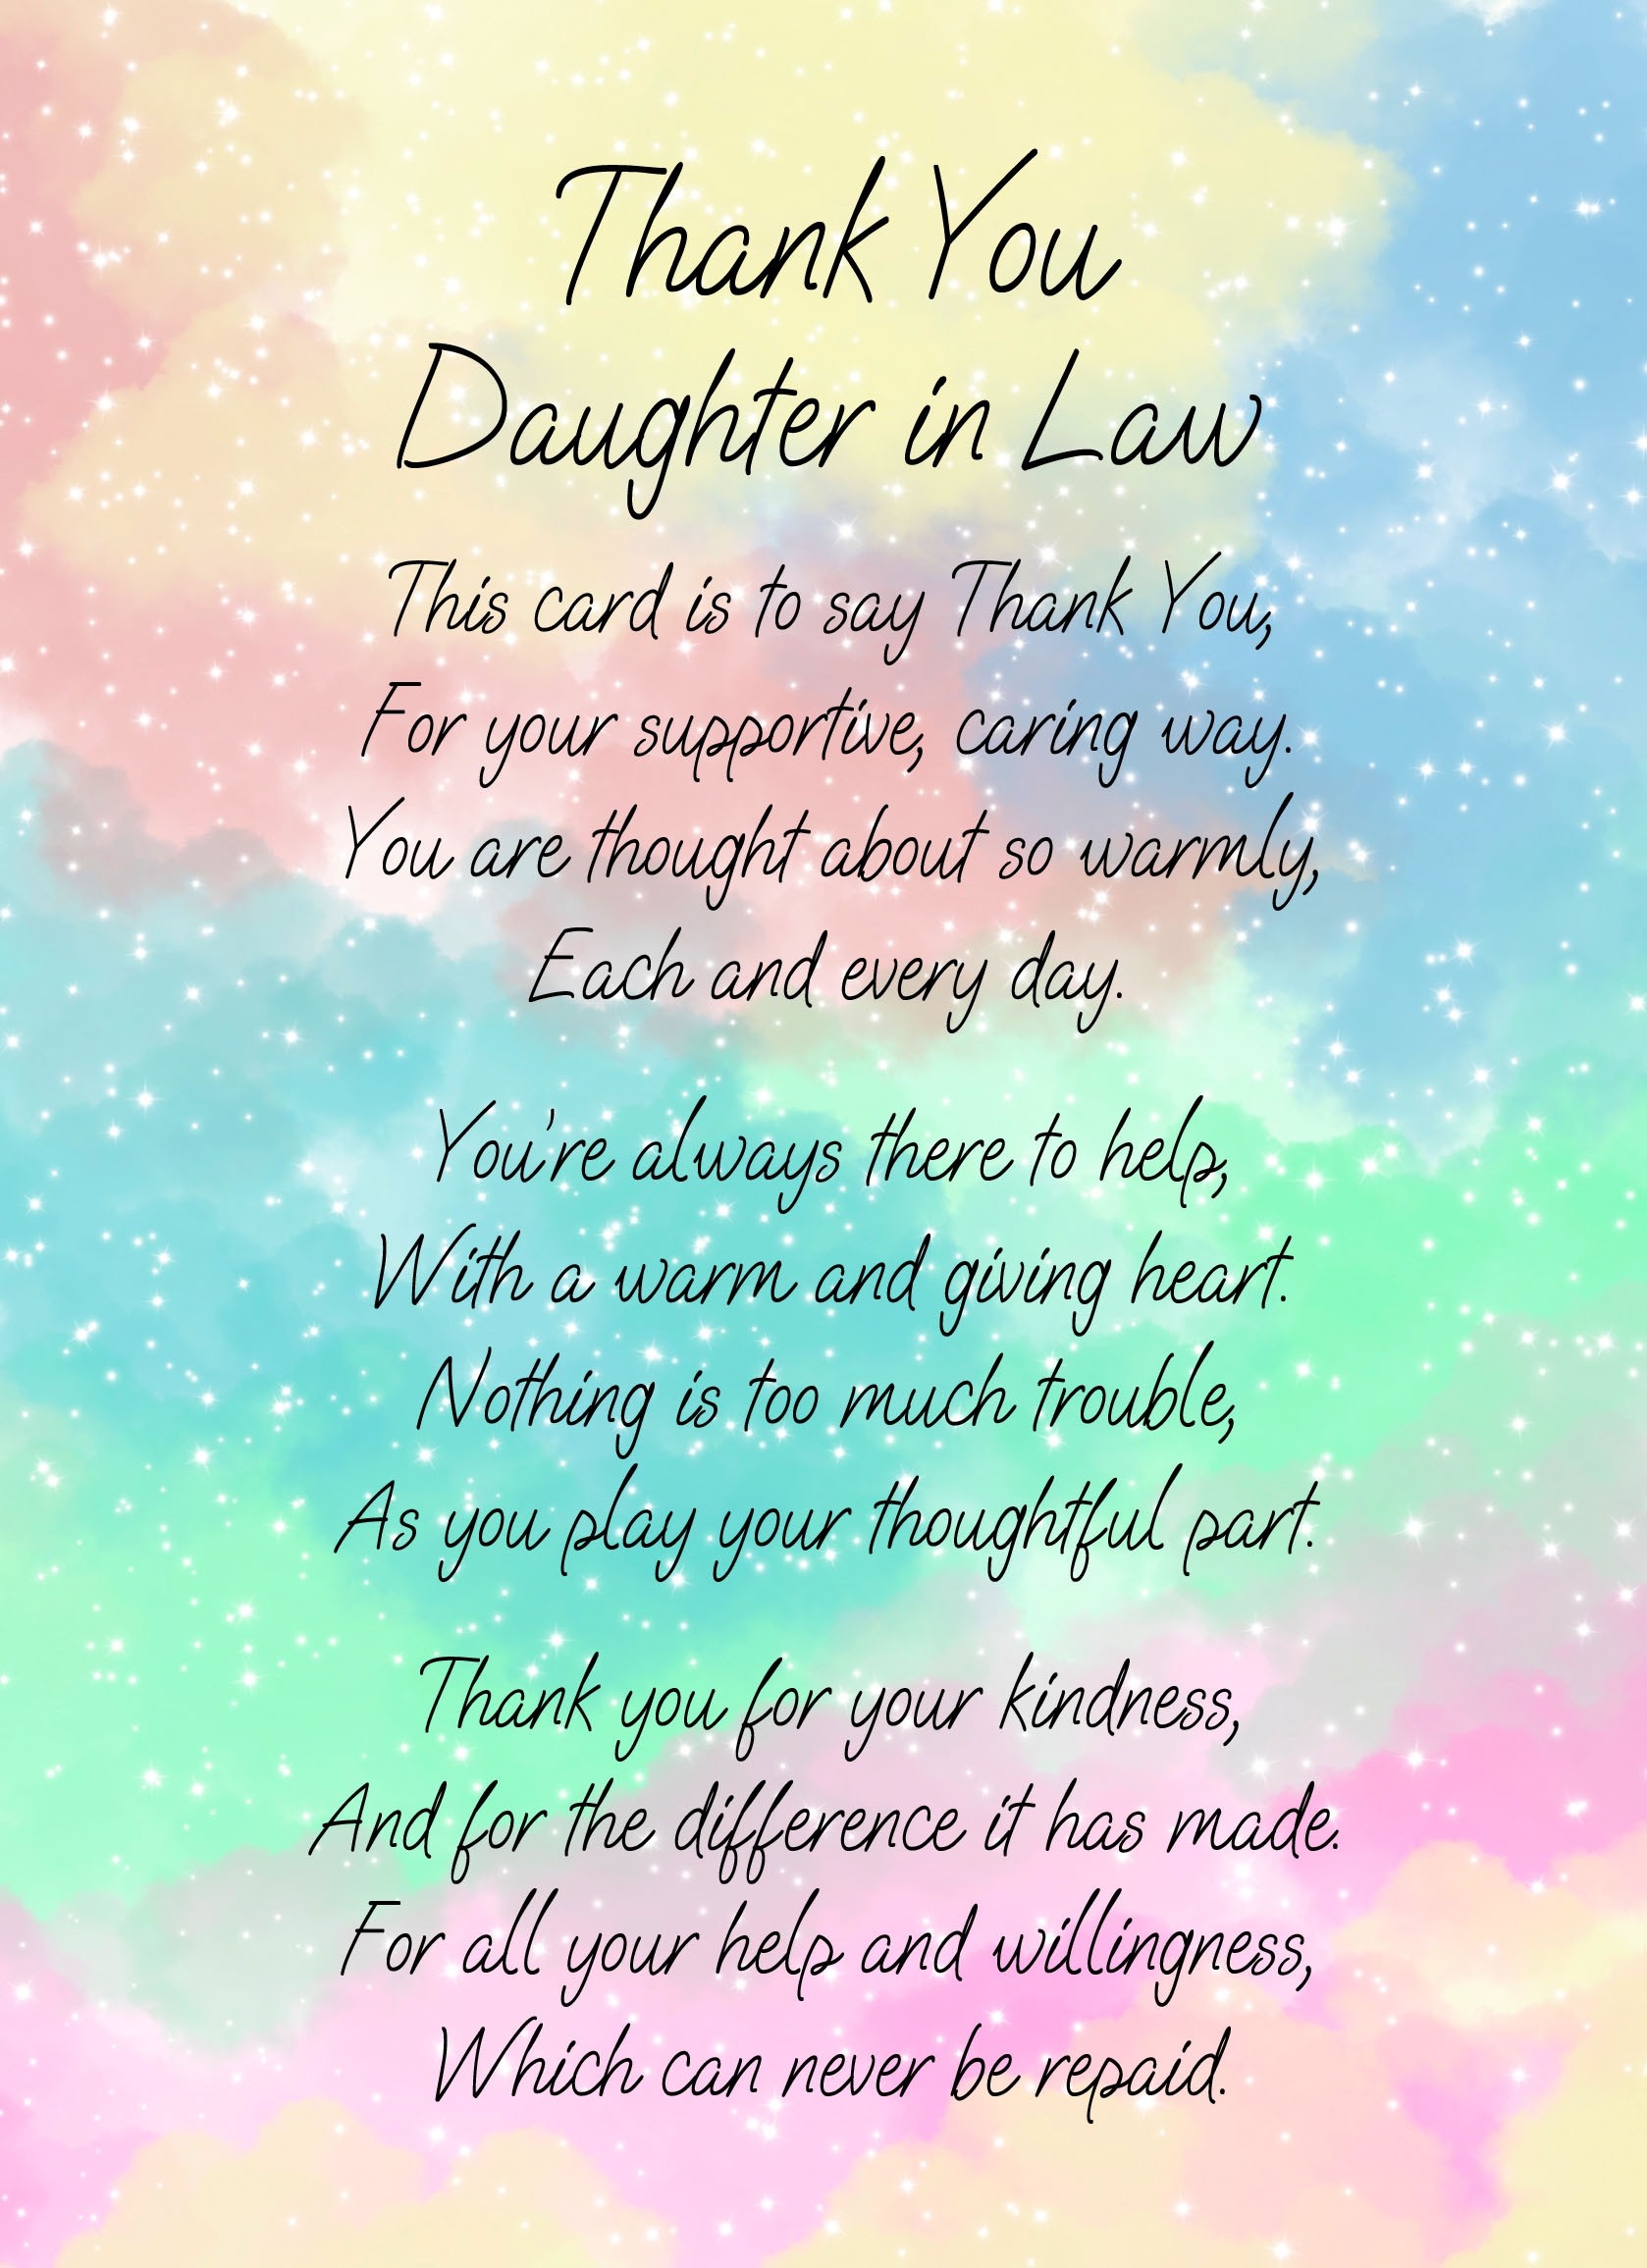 Thank You Poem Verse Card For Daughter in Law